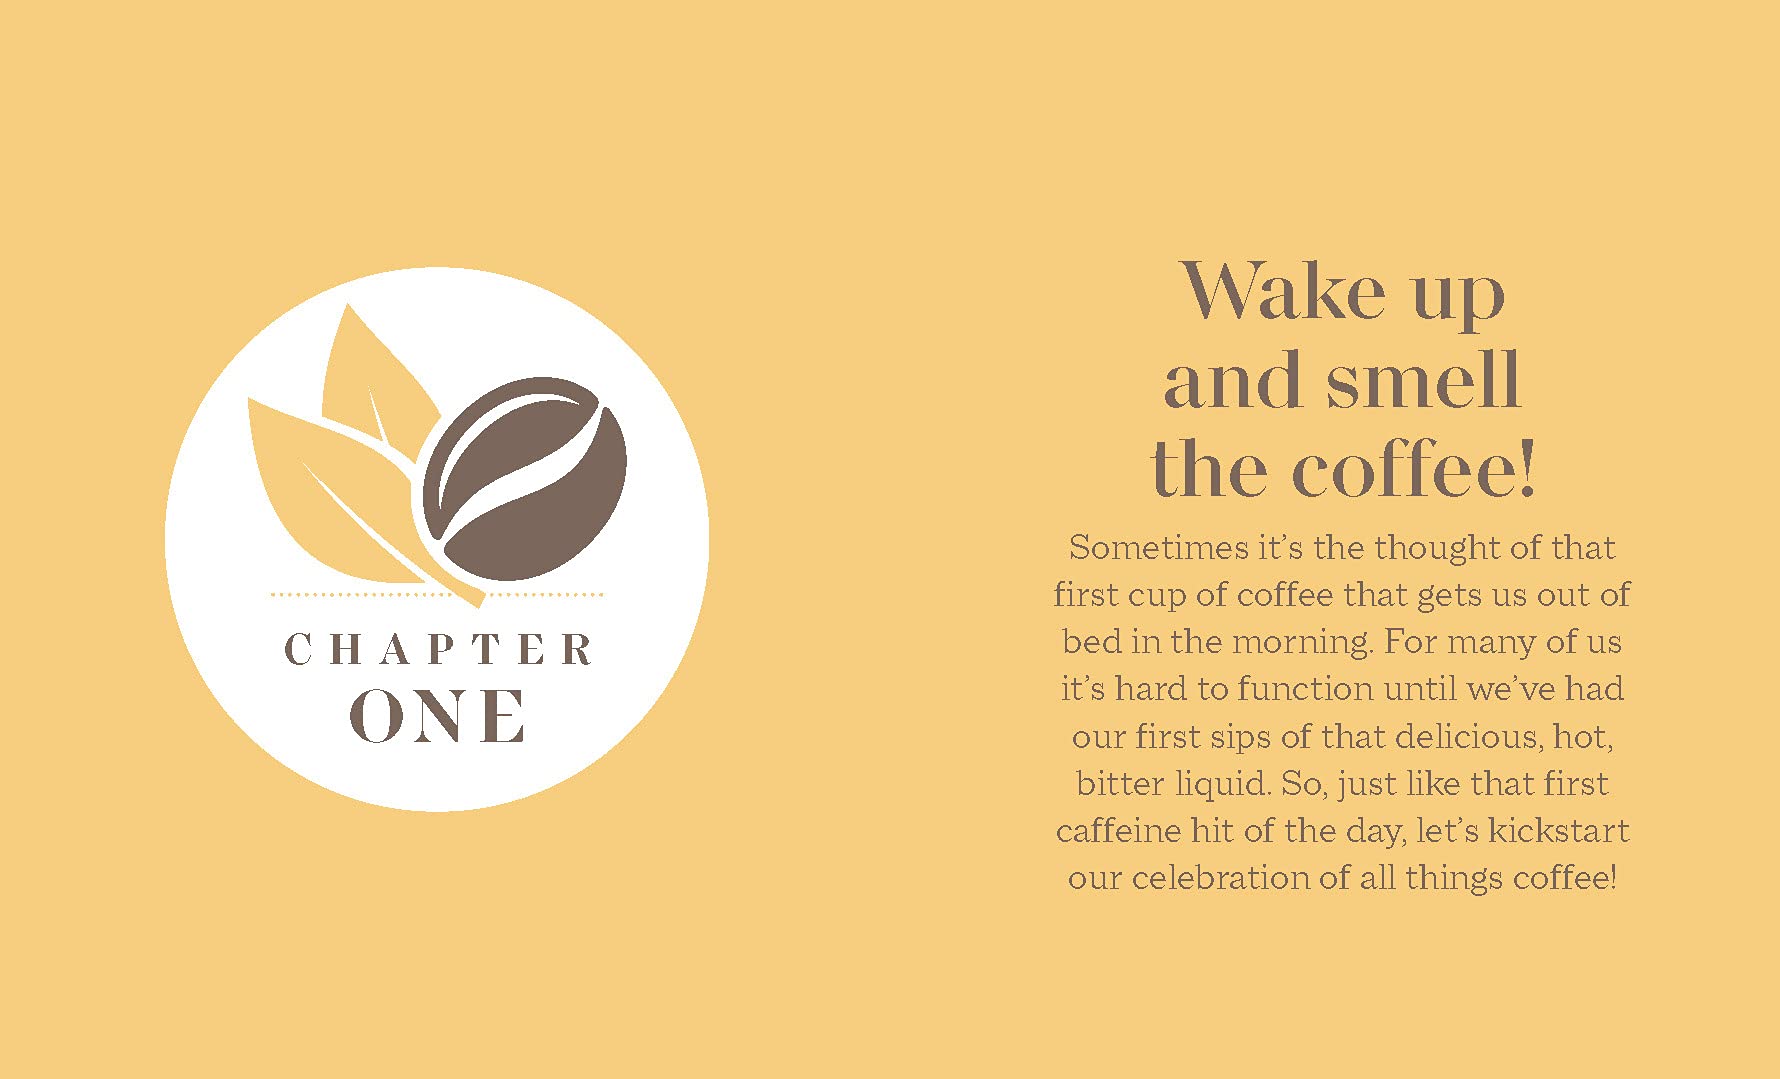 Stuff Every Coffee Lover Should Know By Candace Rose Rardon